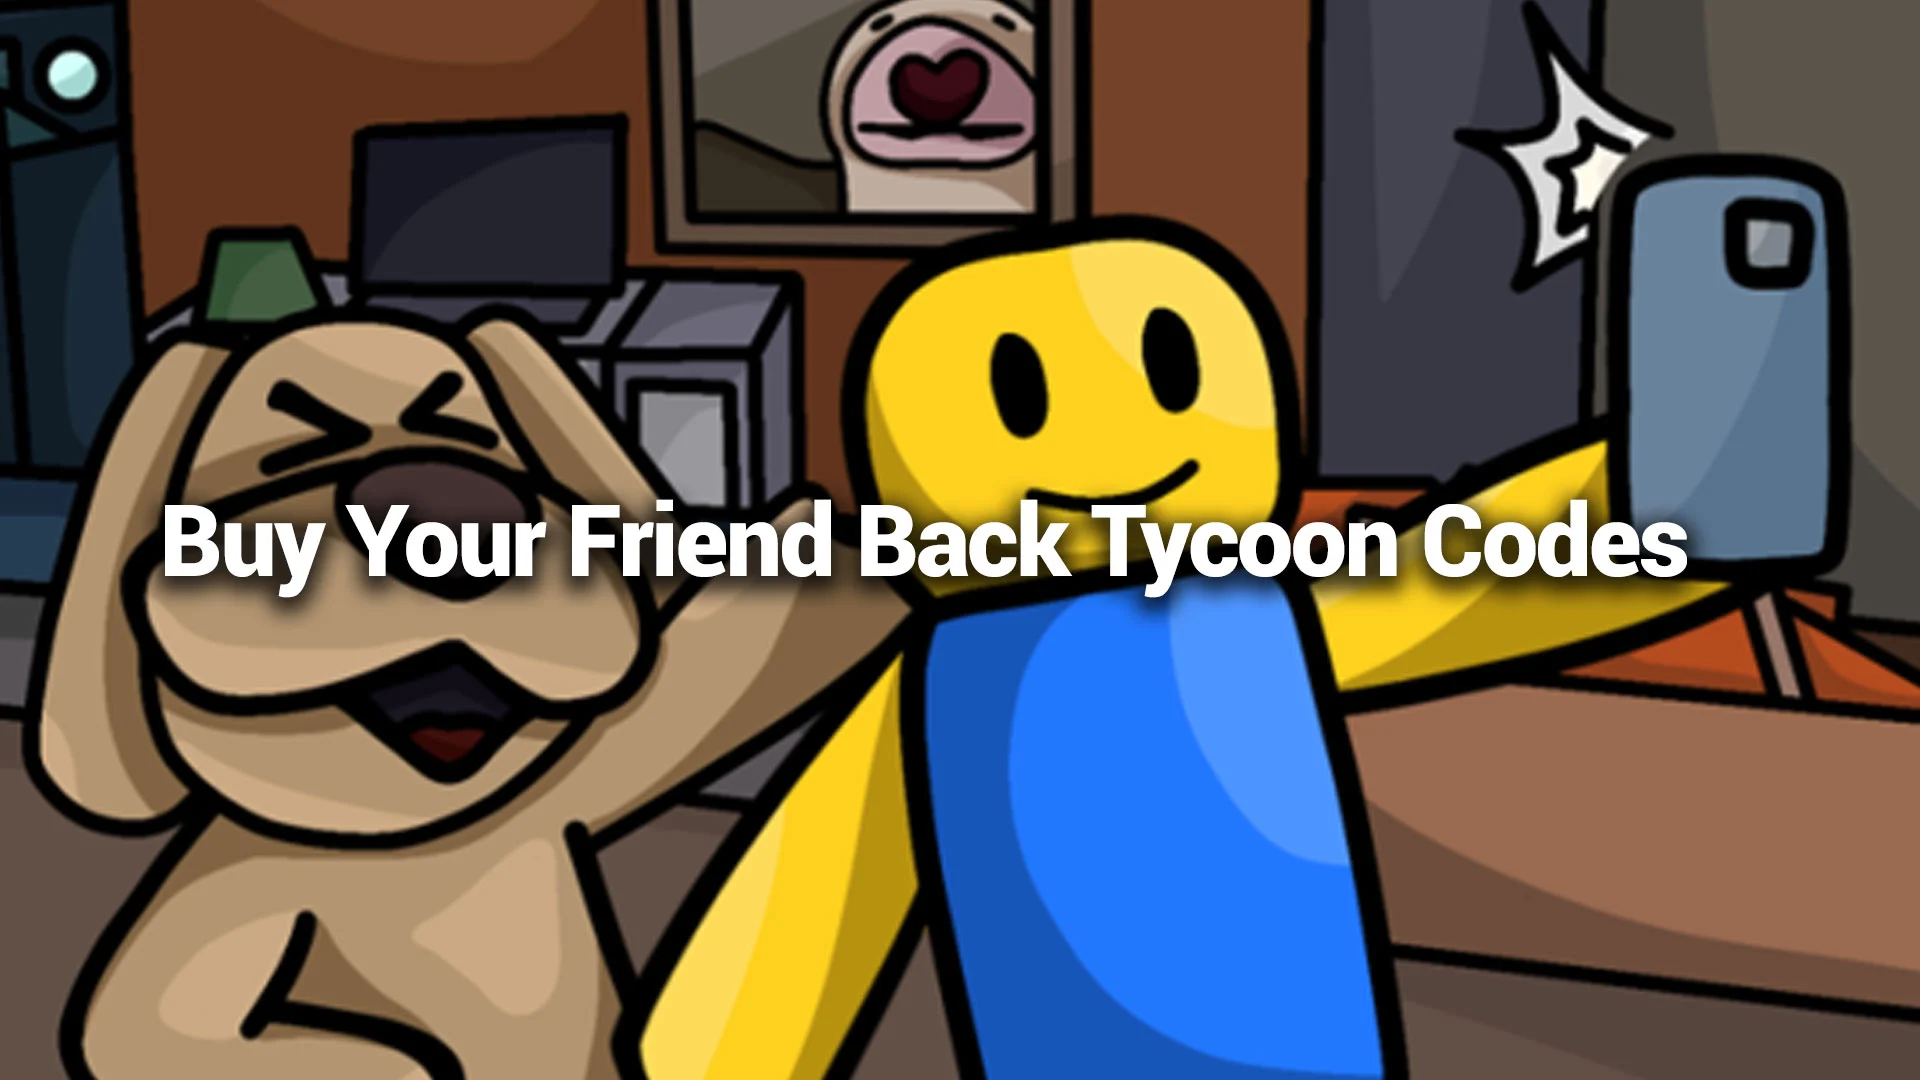 Buy Your Friend Back Tycoon Codes for February 2023